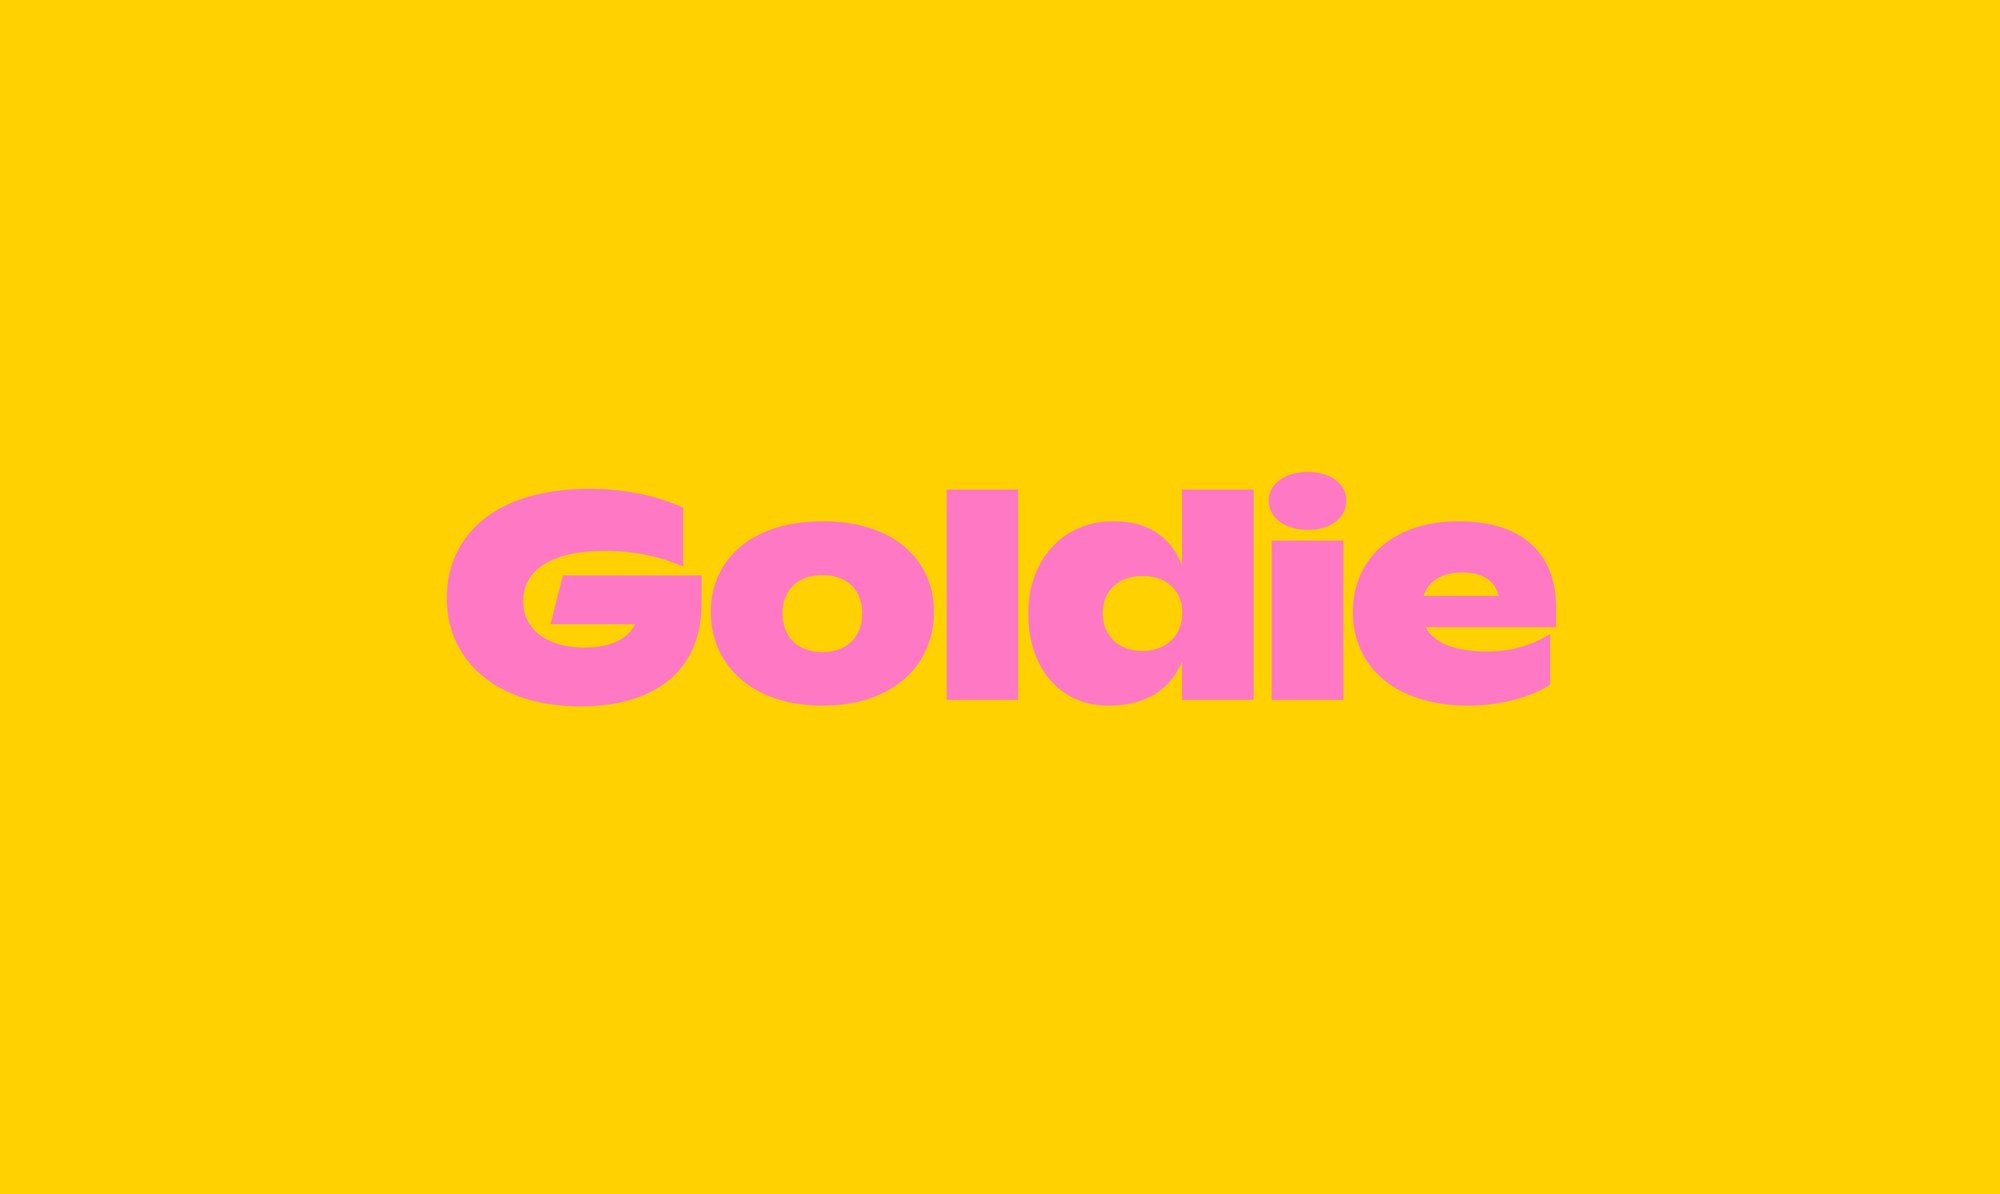  Goldie is an app for buying and selling gold. The brand, app and digital marketing is built on the strategy that if you get gold, you can be bold. Designed with Strategy Creative. 